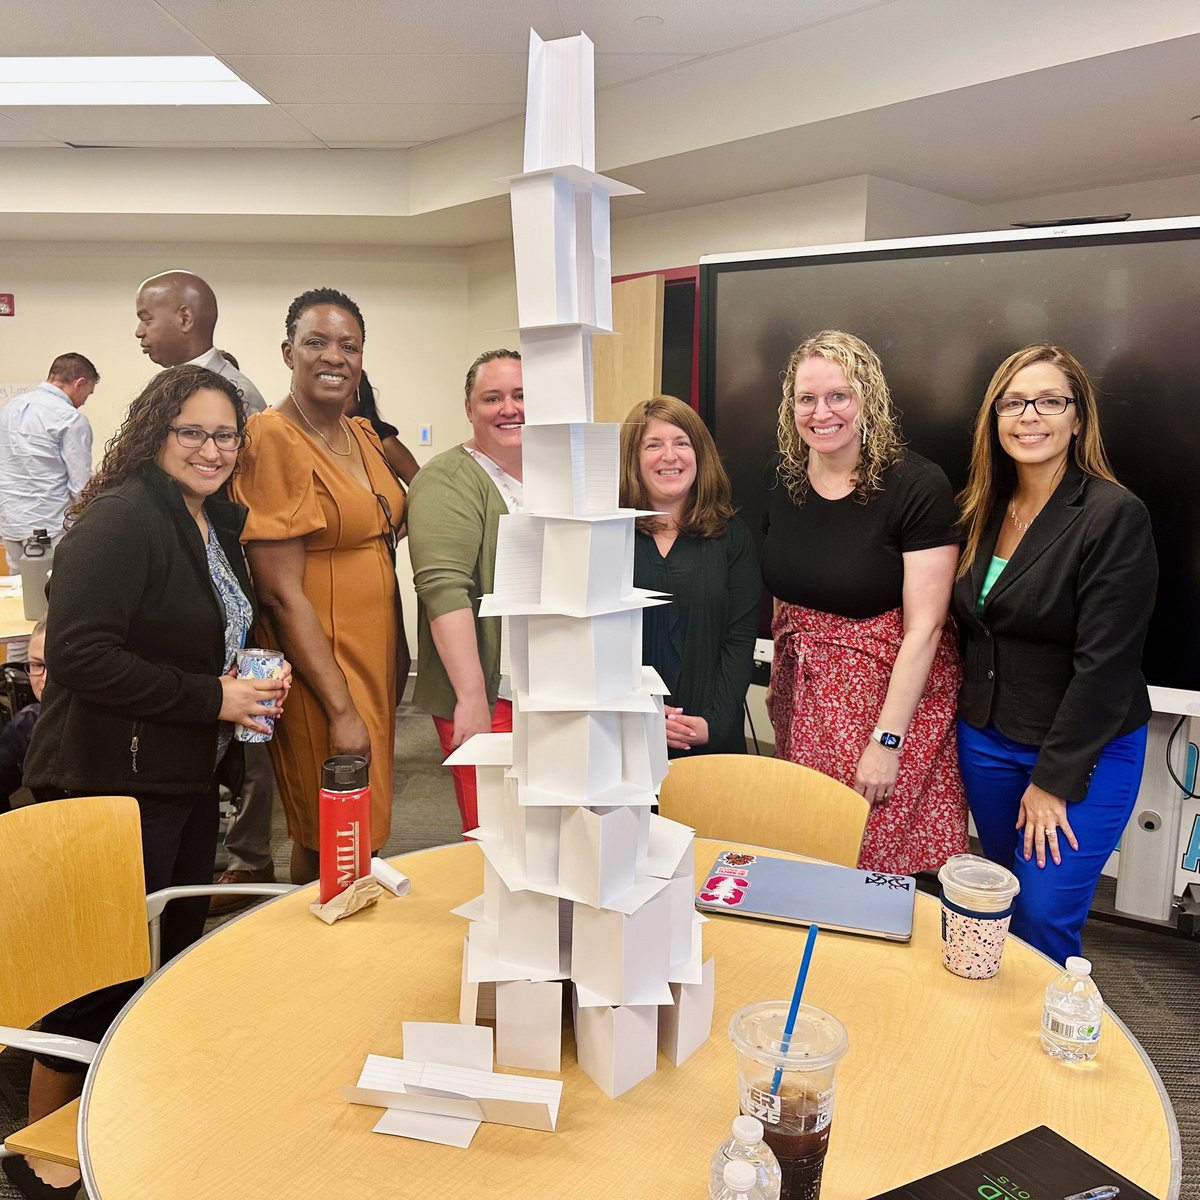 Summer is for #STEMchallenges ! Thanks to the team at @MilnerMiddle for bringing this fun community builder to our last day of leadership institute! Principal Wilson-Ruff @STEMEdCT used her #stemskills to support her team in #learningandgrowing! @msboratko @Hartford_Public